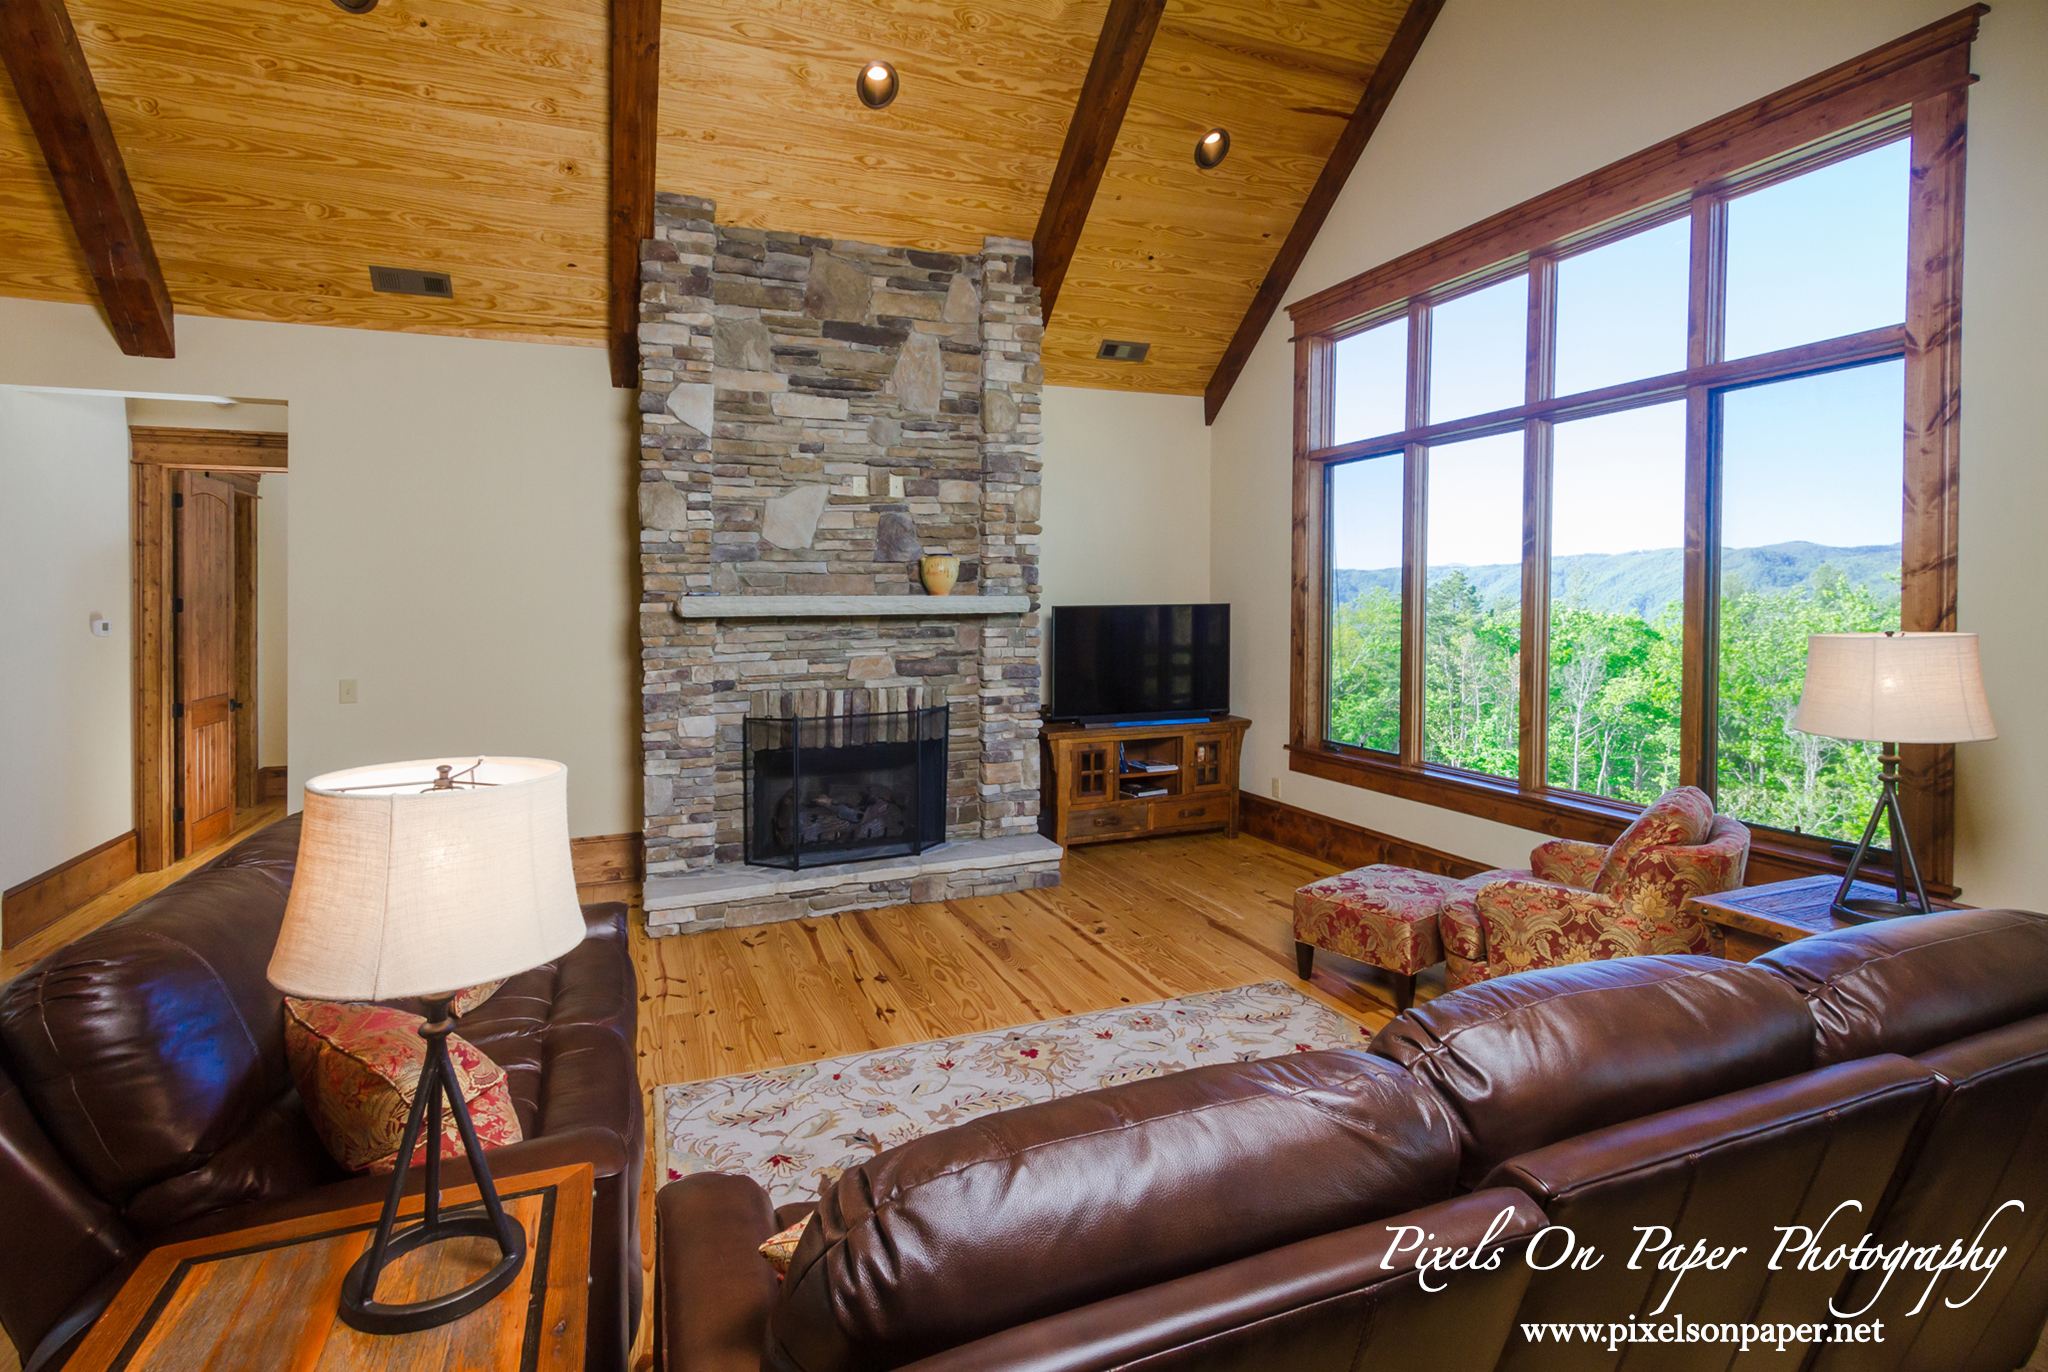 MBI Builders custom home blue ridge mountain club architectural photography pixels on paper commercial photographers photo